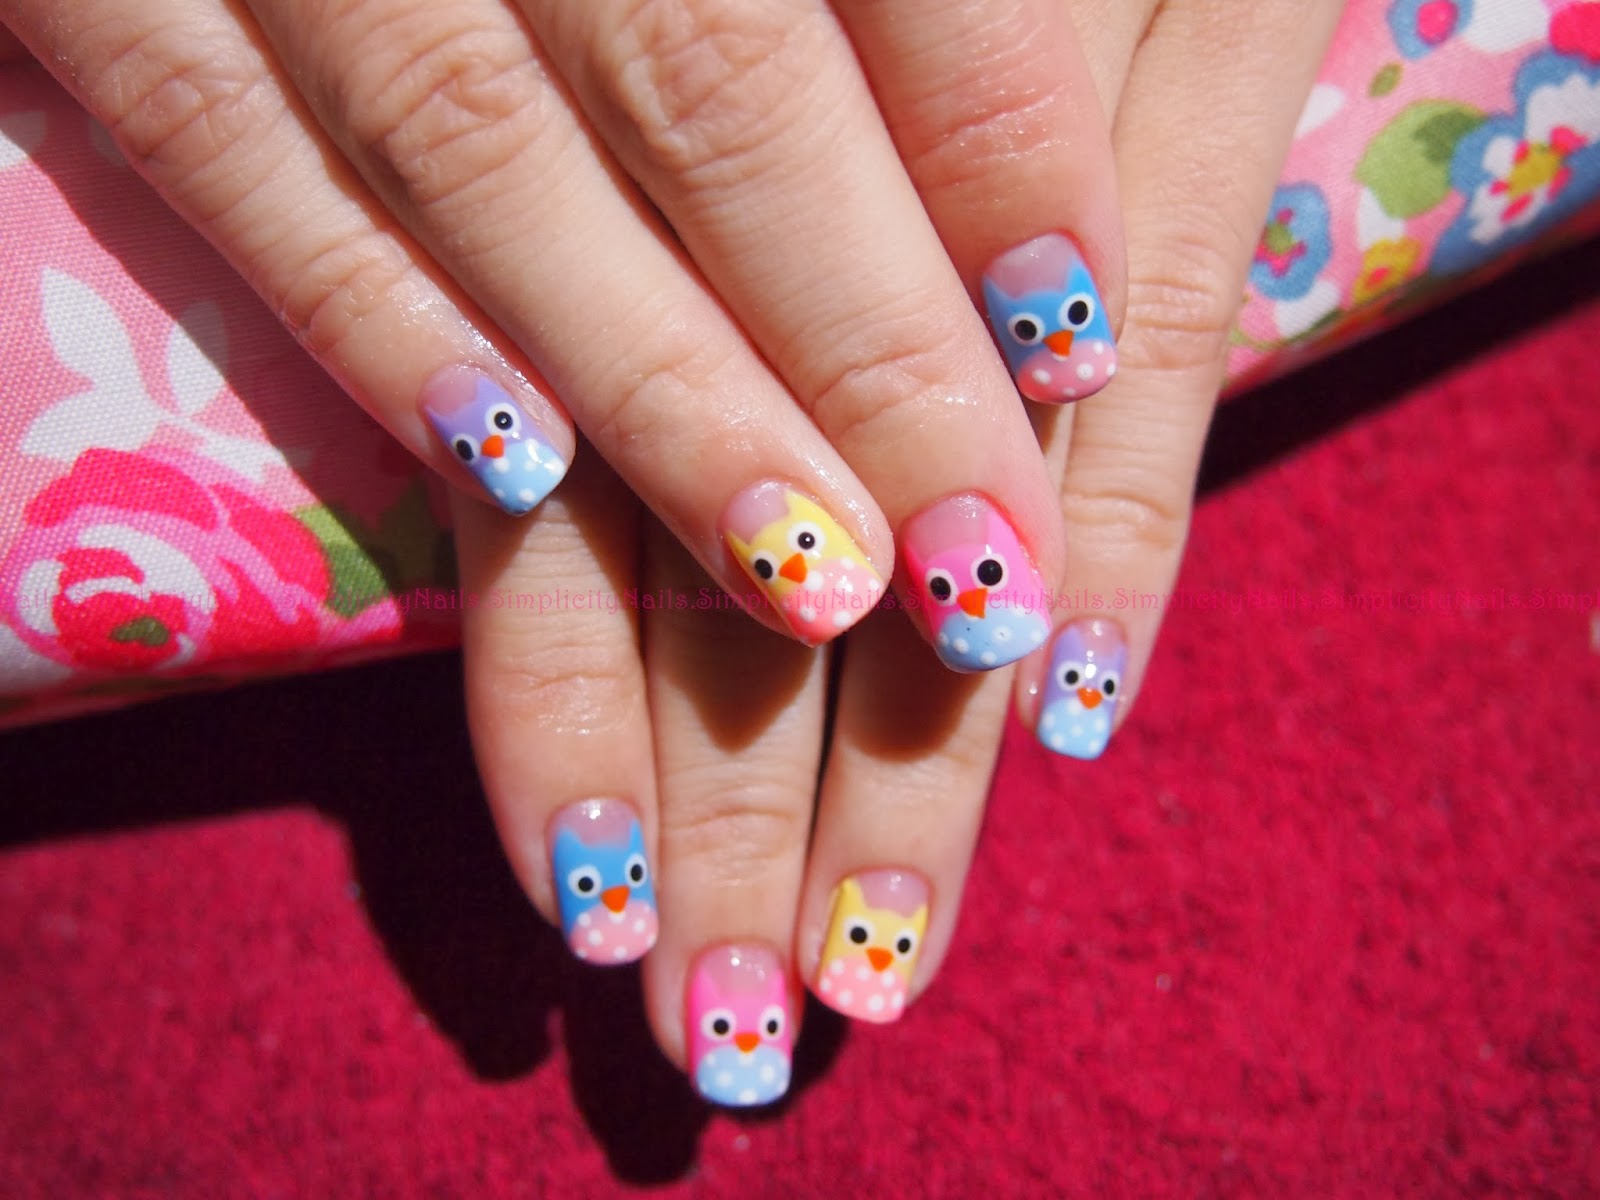 3. Adorable Animal Nail Designs for Kids - wide 5